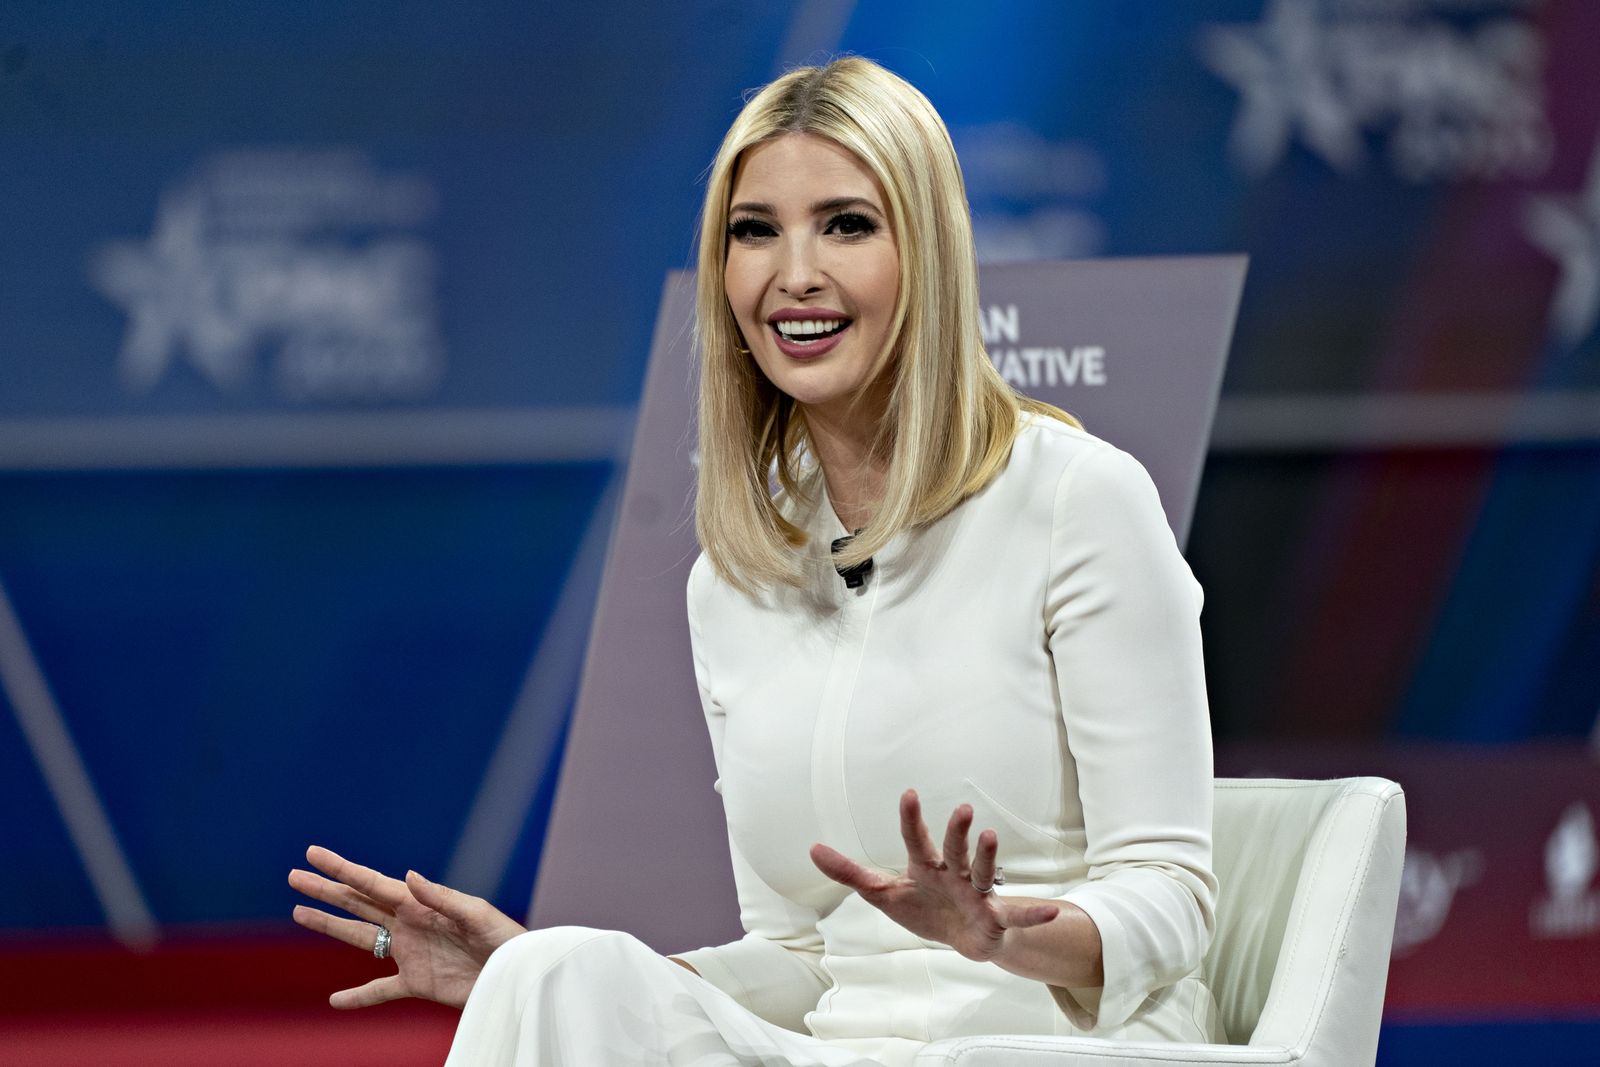 Ivanka Trump speaks during the Conservative Political Action Conference (CPAC) in National Harbor, Maryland, on February 28, 2020 | Photo: Andrew Harrer/Bloomberg/Getty Images